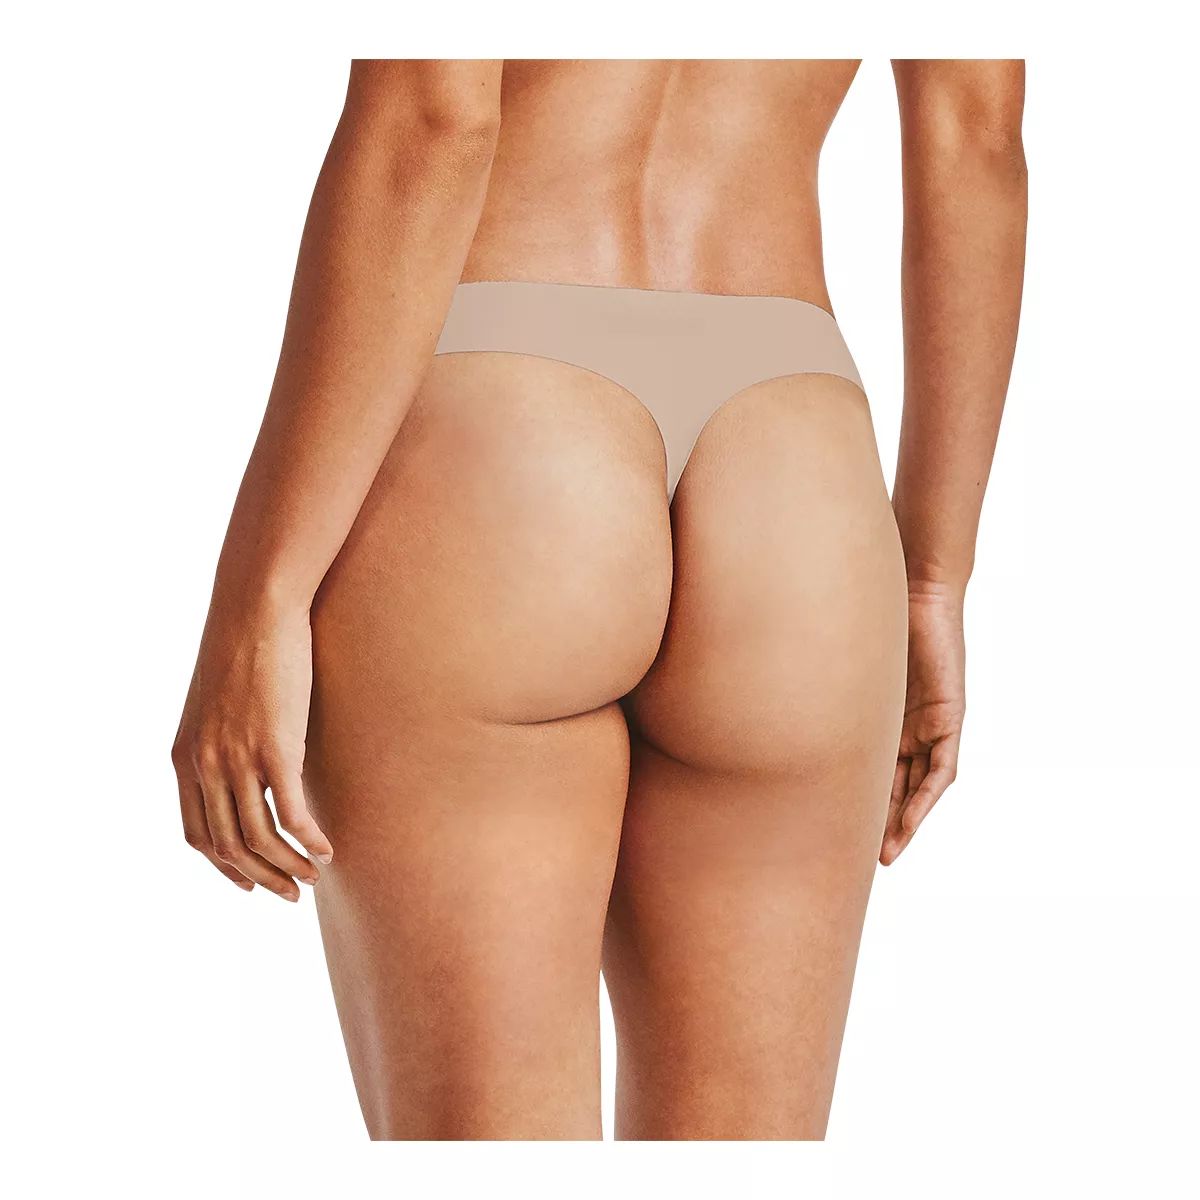  Customer reviews: Tulucky Women's PU Leather Thong